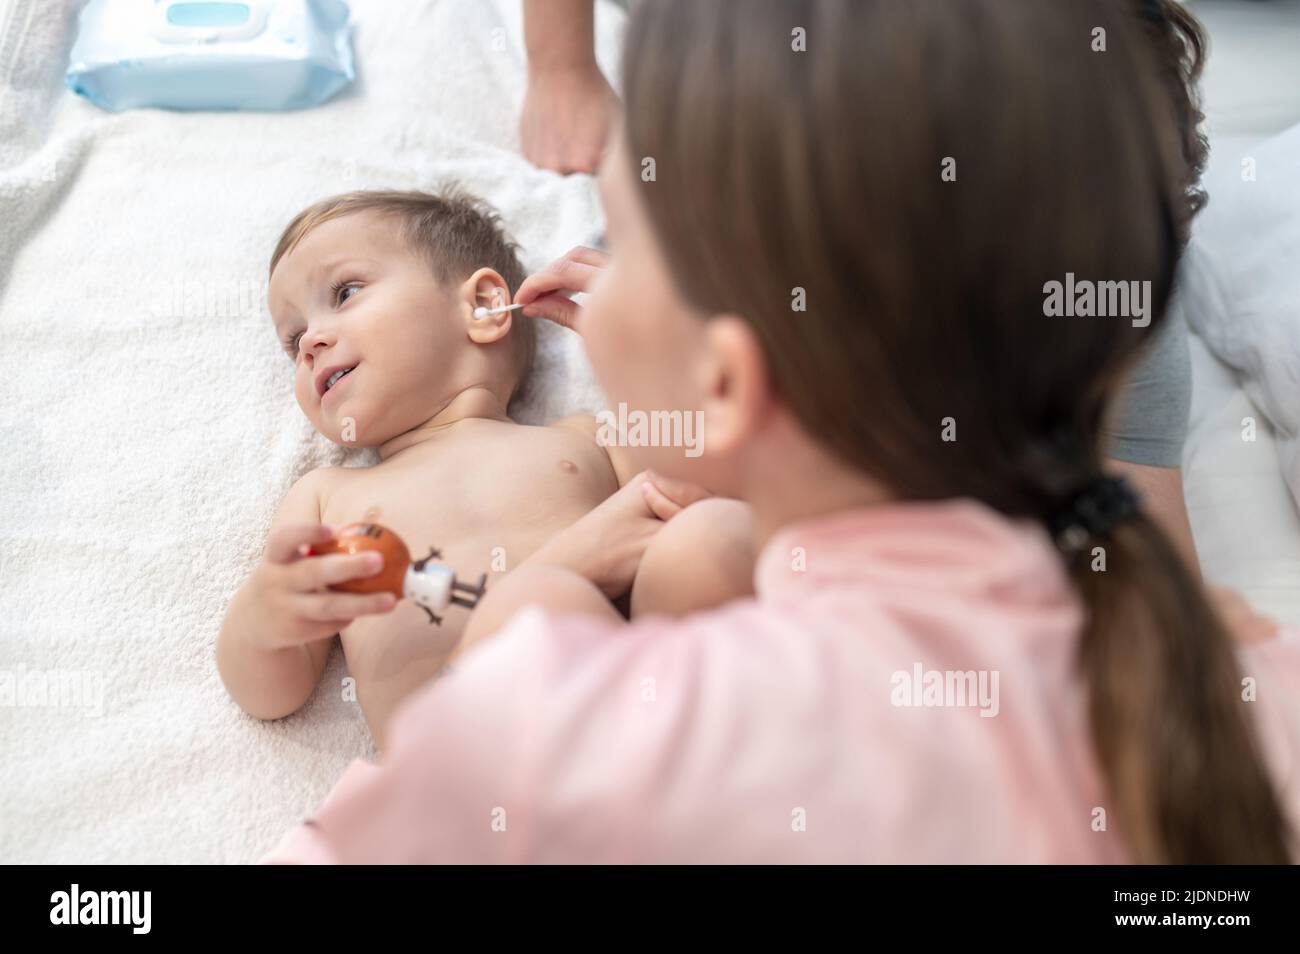 Woman cleaning ear of child lying on bed Stock Photo